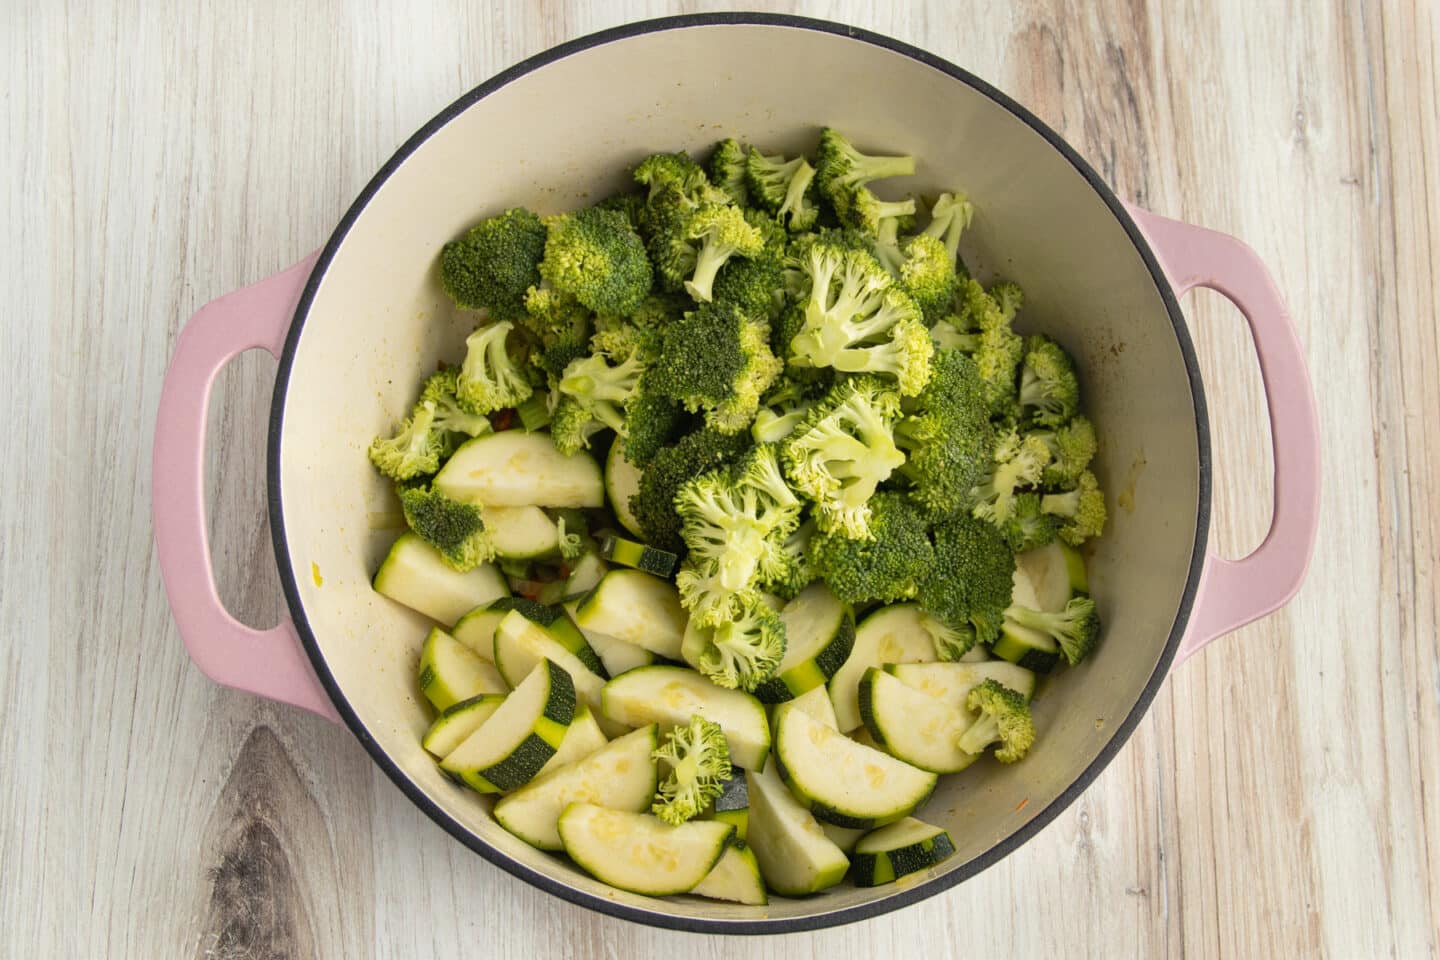 This is a picture of a pot with broccoli and zucchini added.